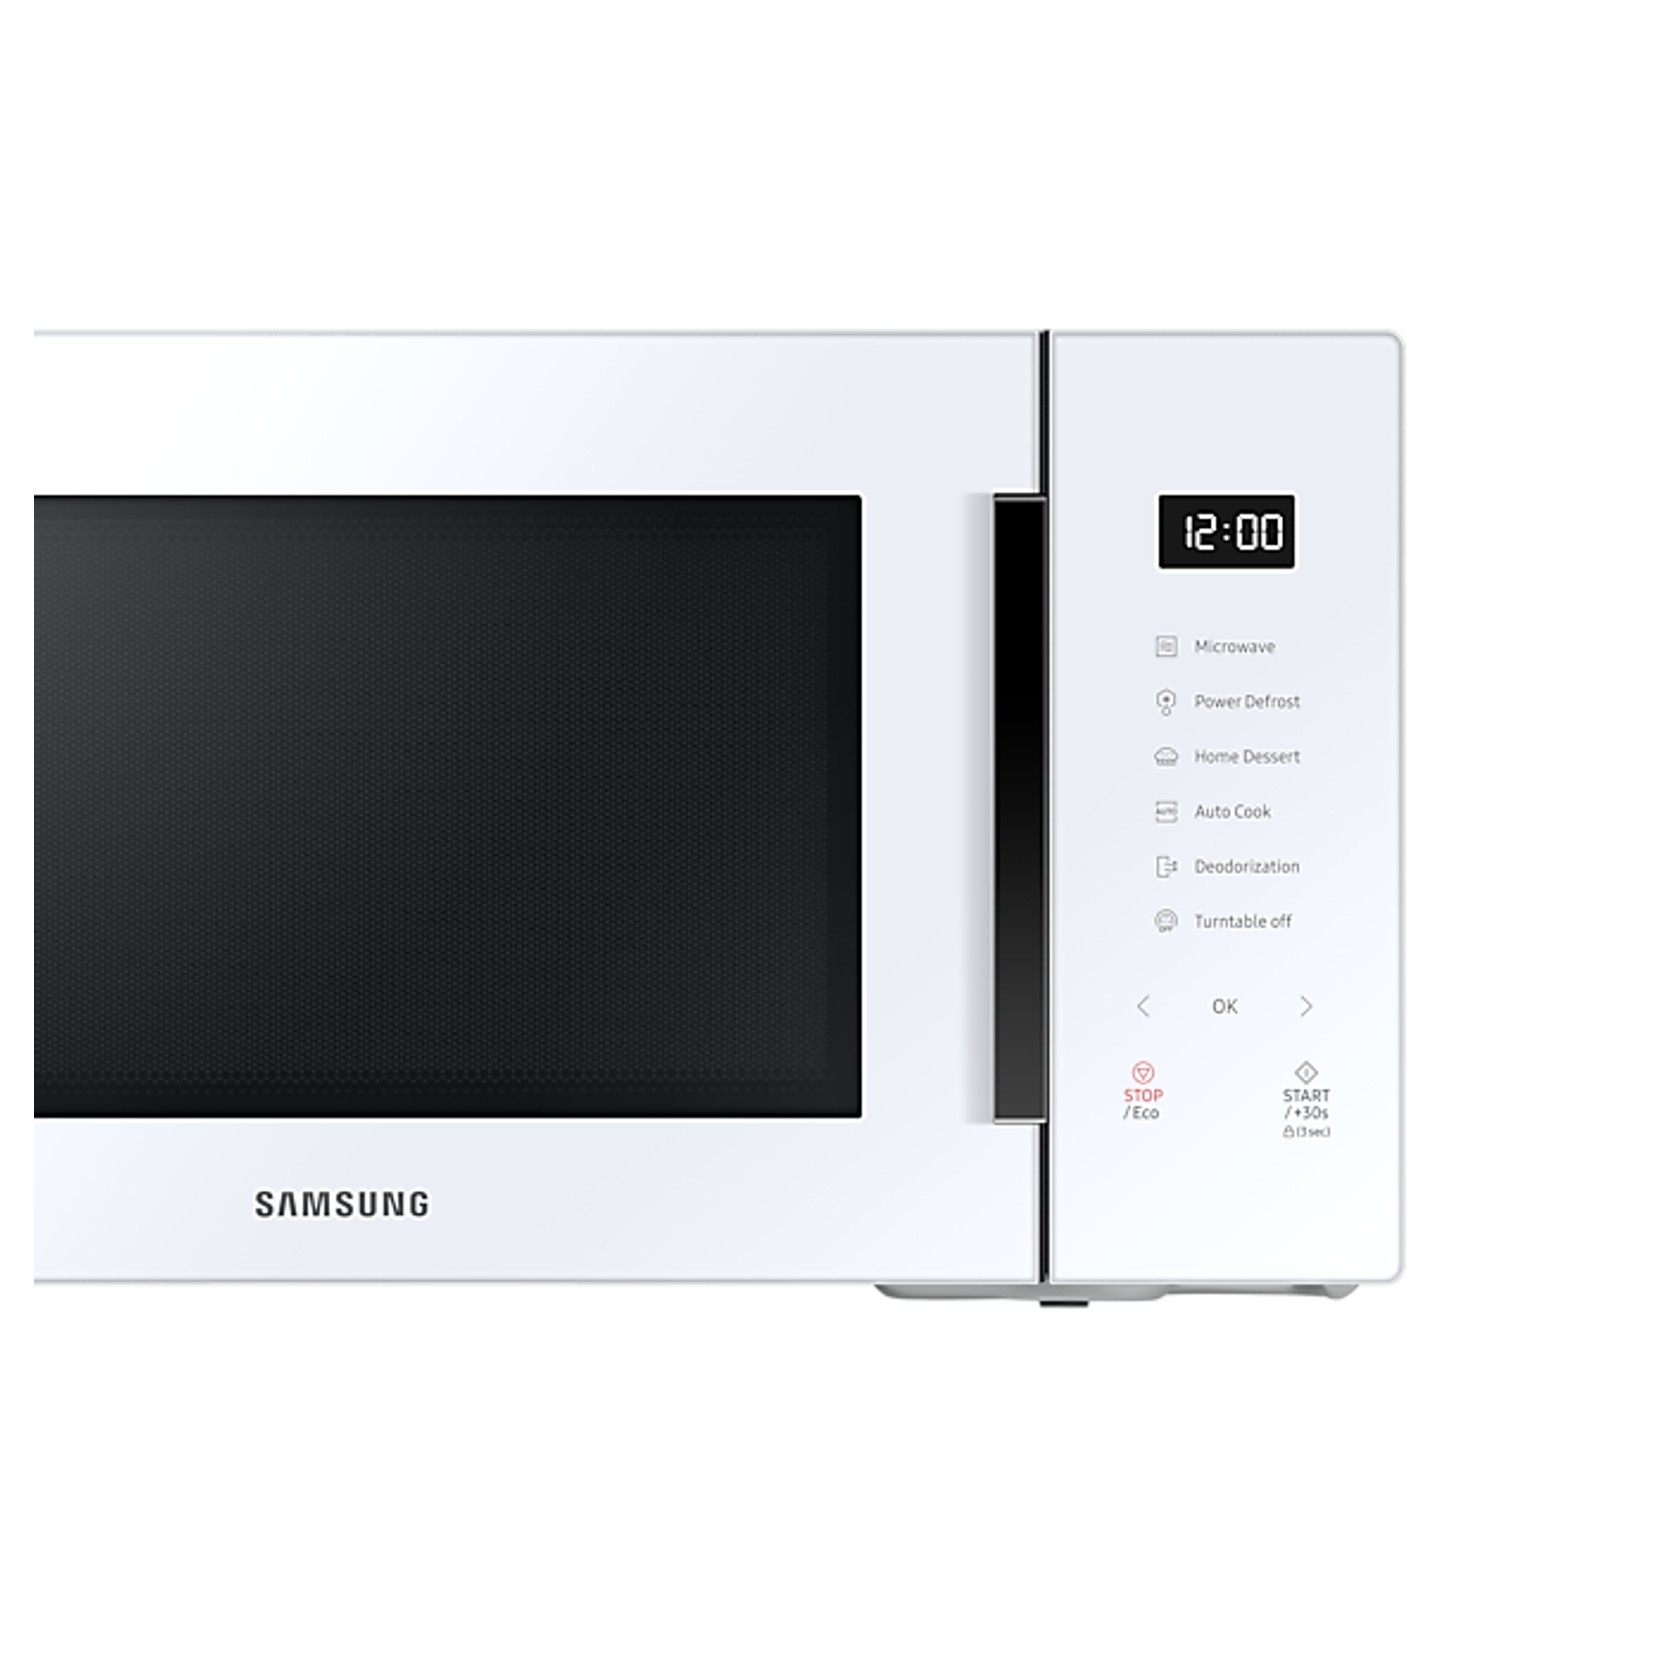 Bespoke 30L Microwave Oven with Home Dessert gallery detail image